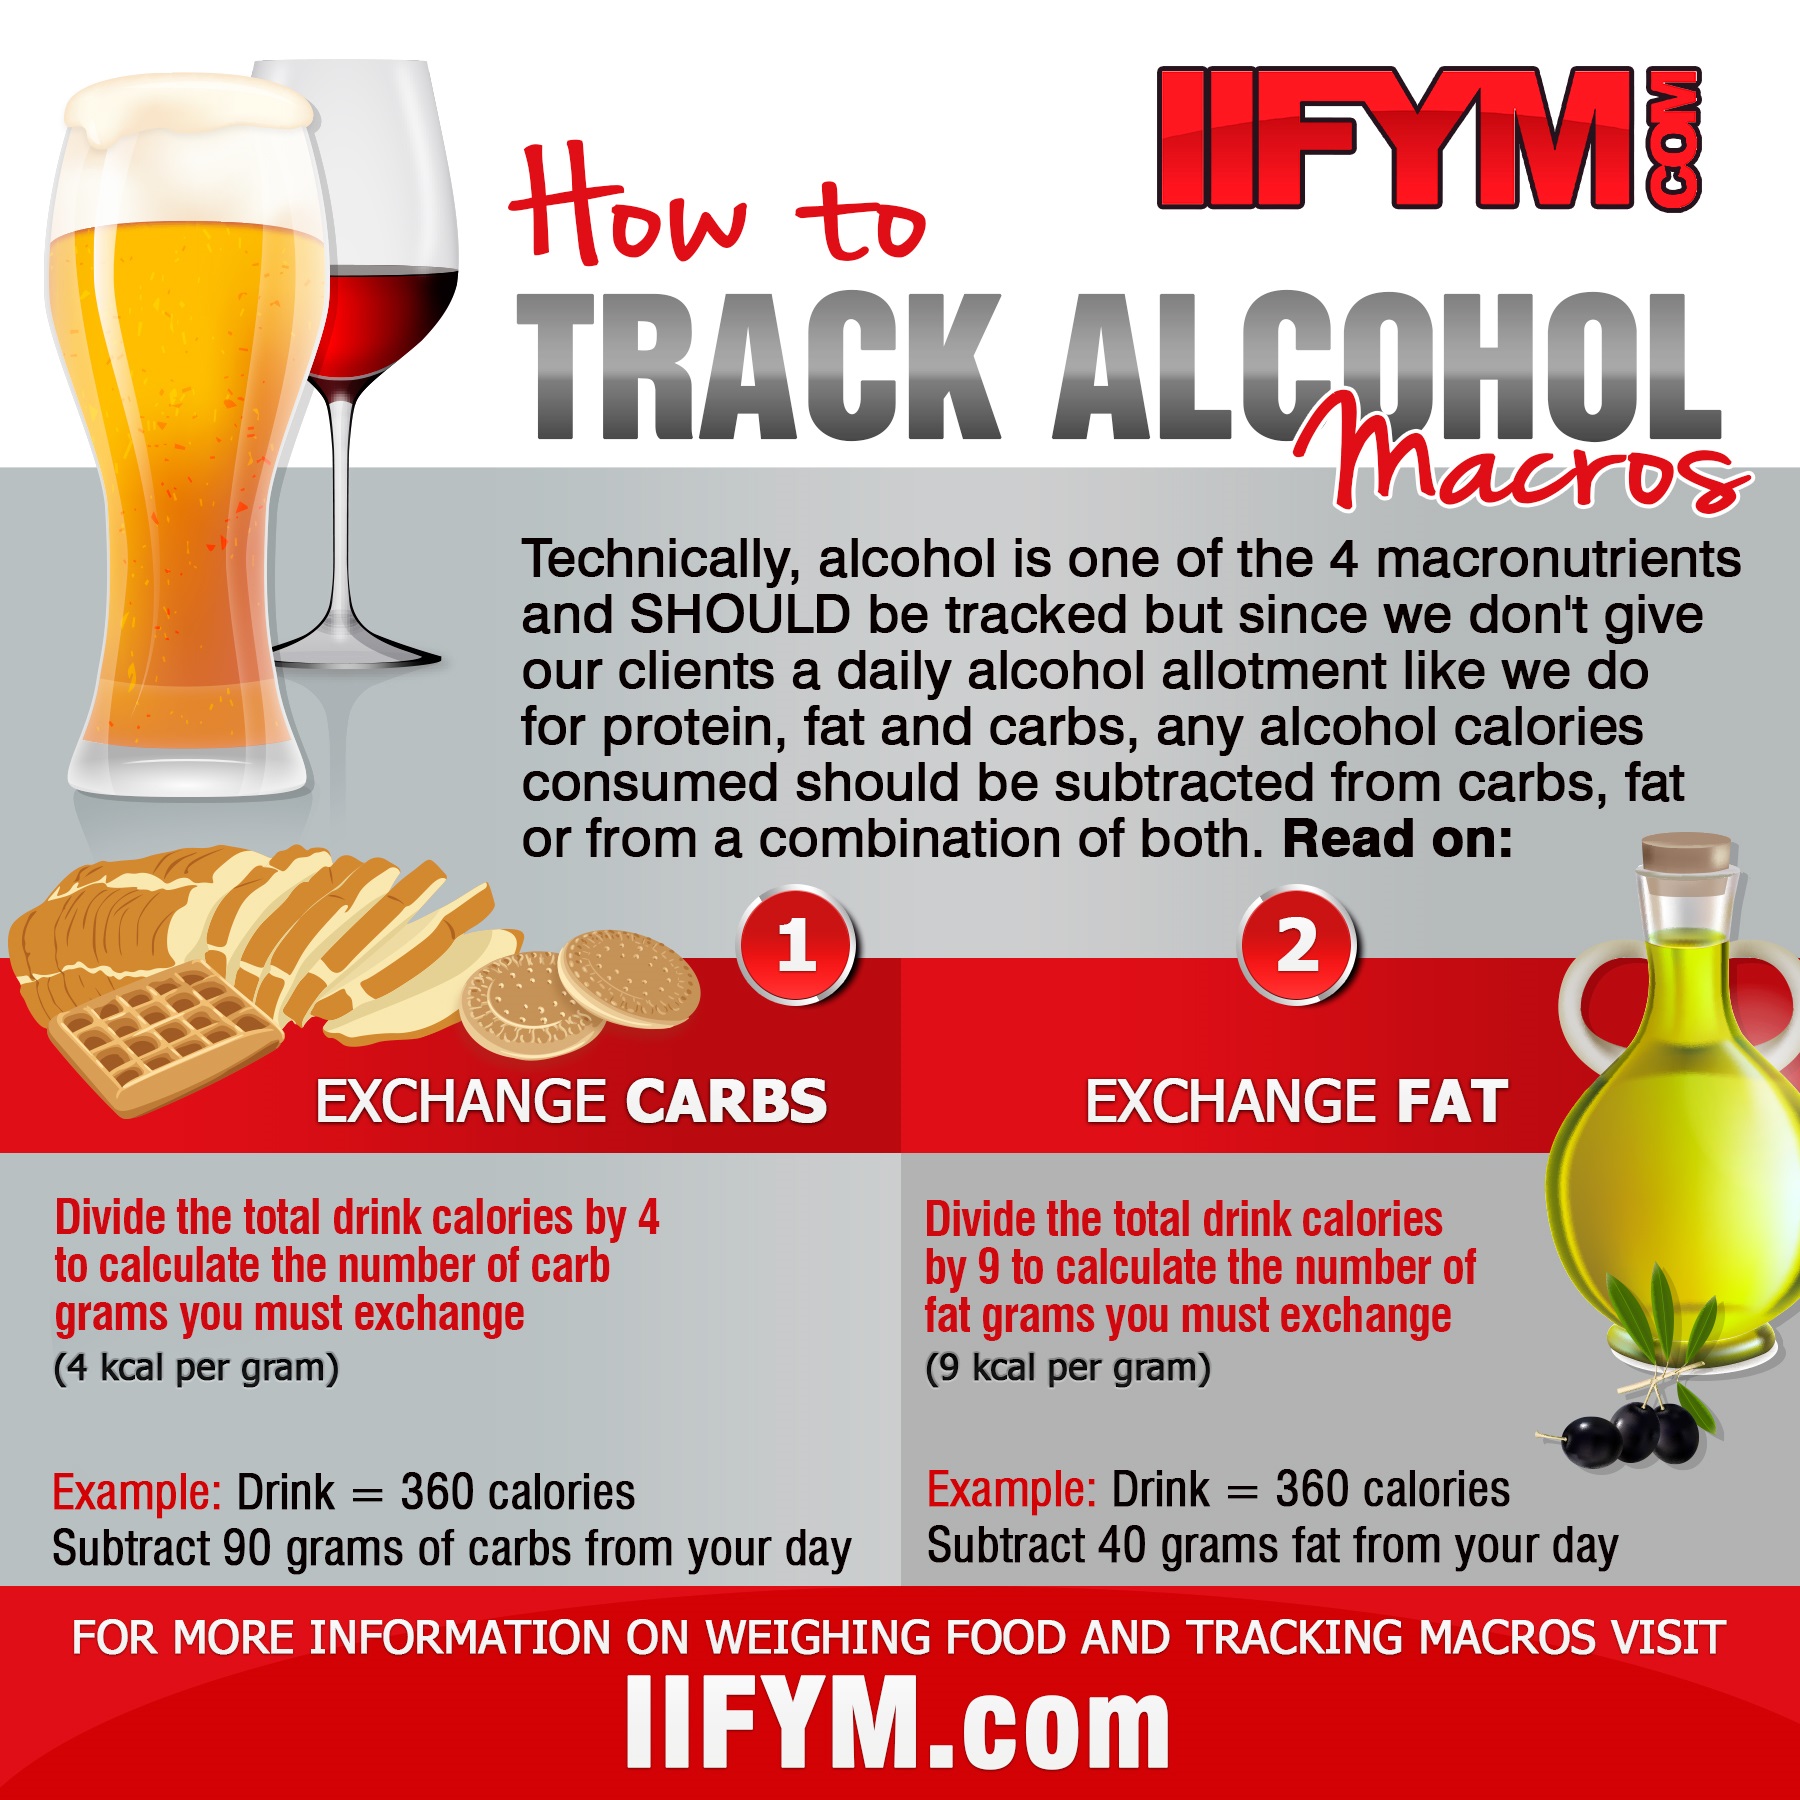 Lowest Calorie Alcohol: How Much Can You Drink Before It..